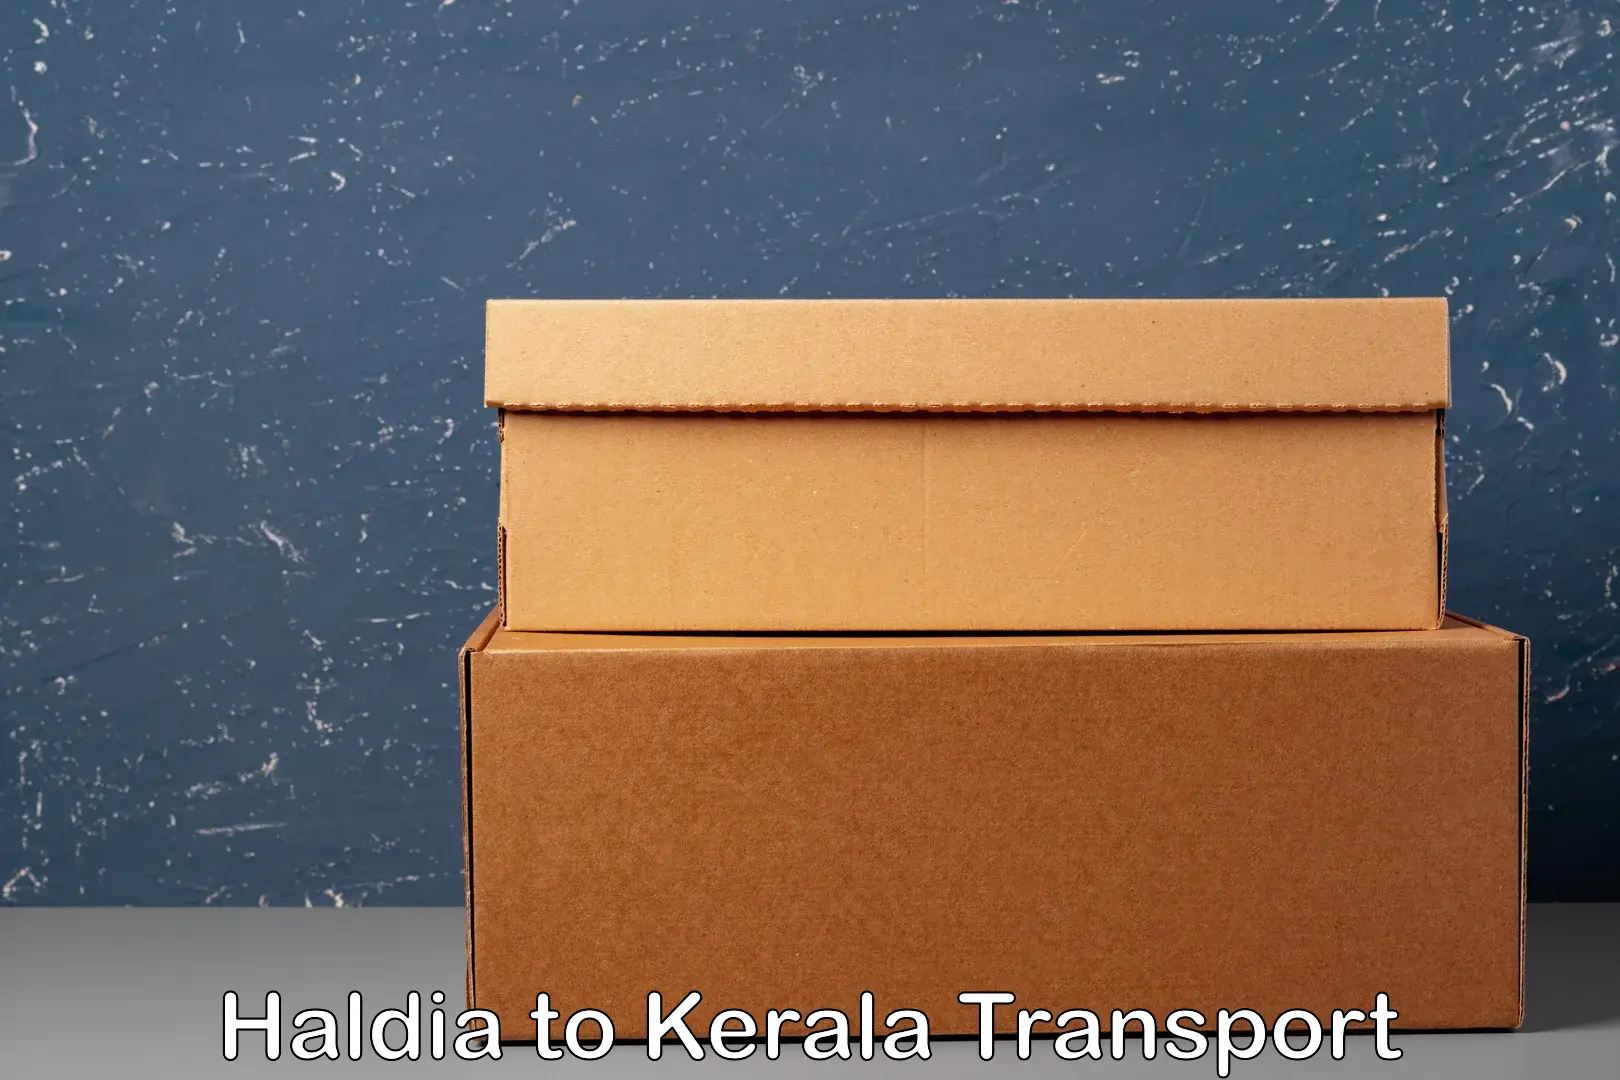 Transport bike from one state to another Haldia to Kerala